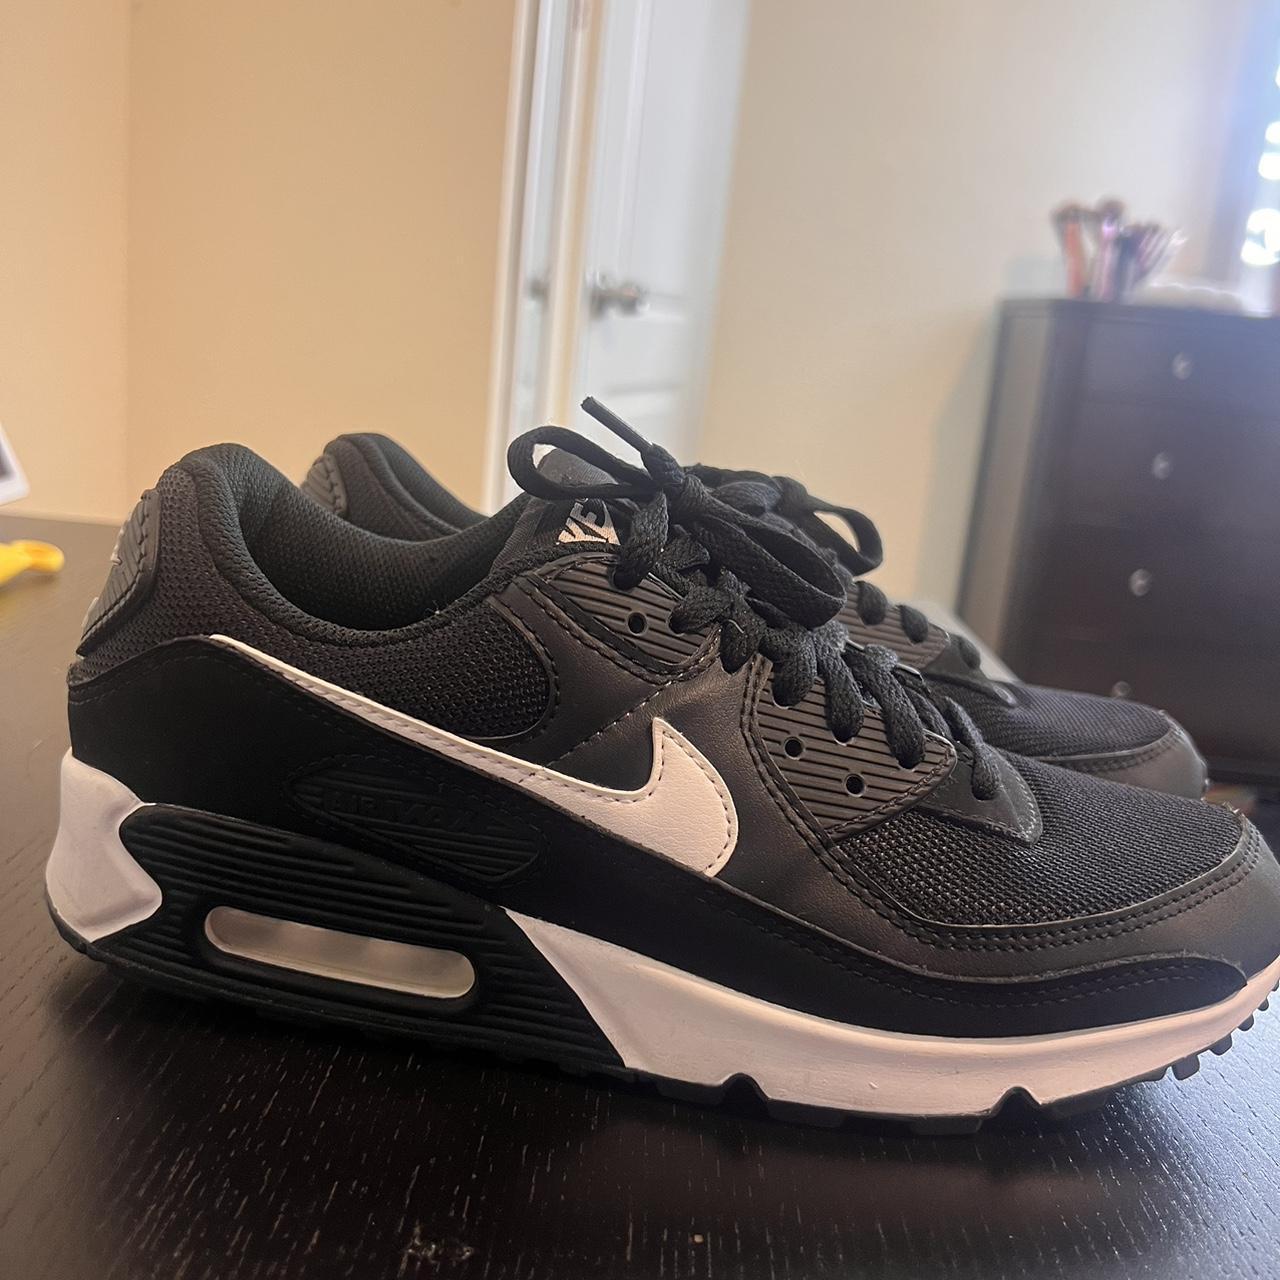 Nike air max 90 Size 9.5 women’s In great... - Depop